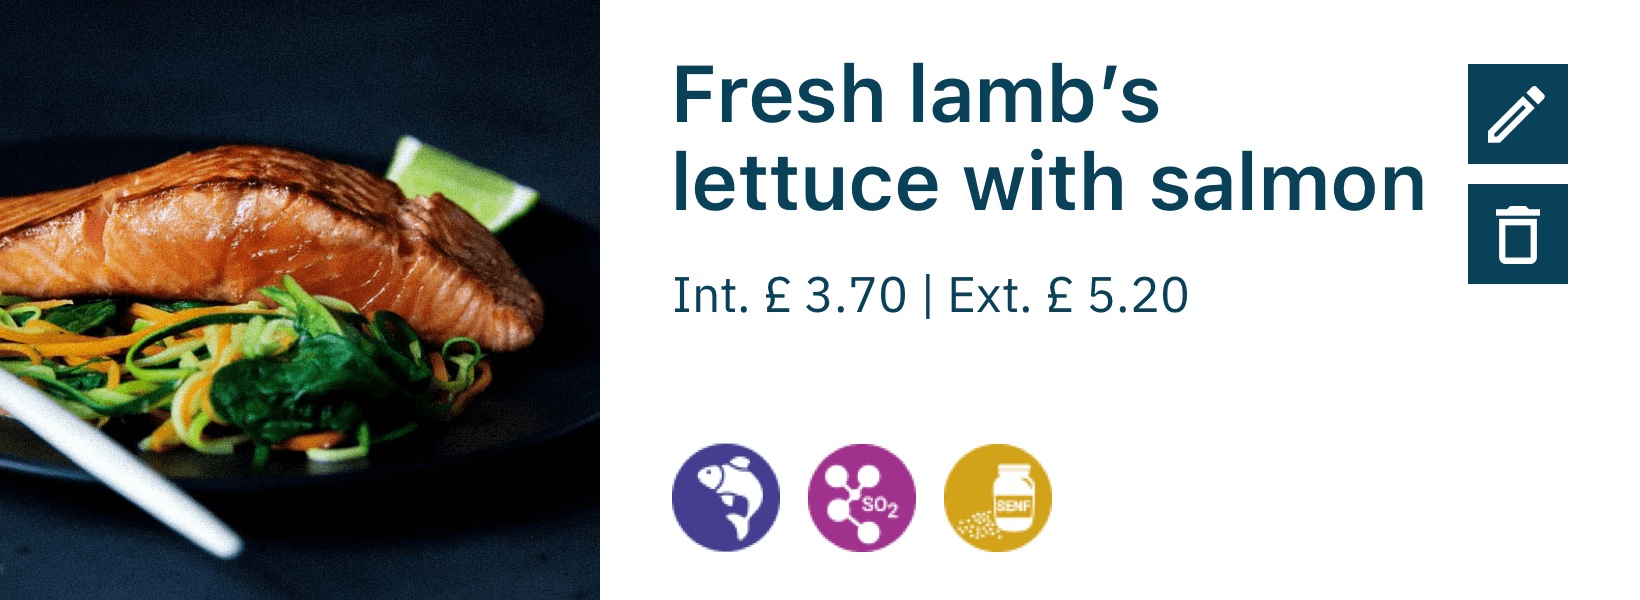 Menu for lamb's lettuce with salmon